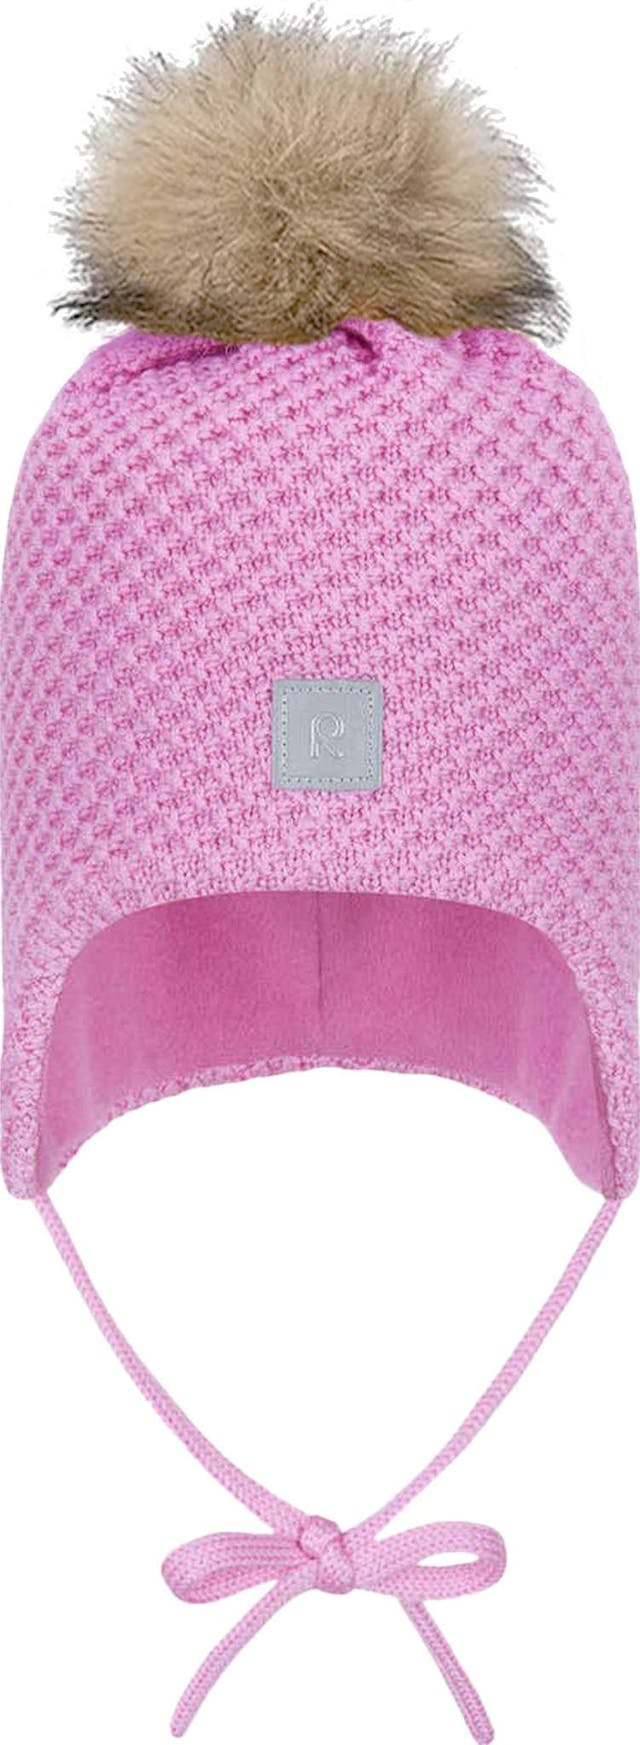 Product image for Murmeli Beanie - Kids